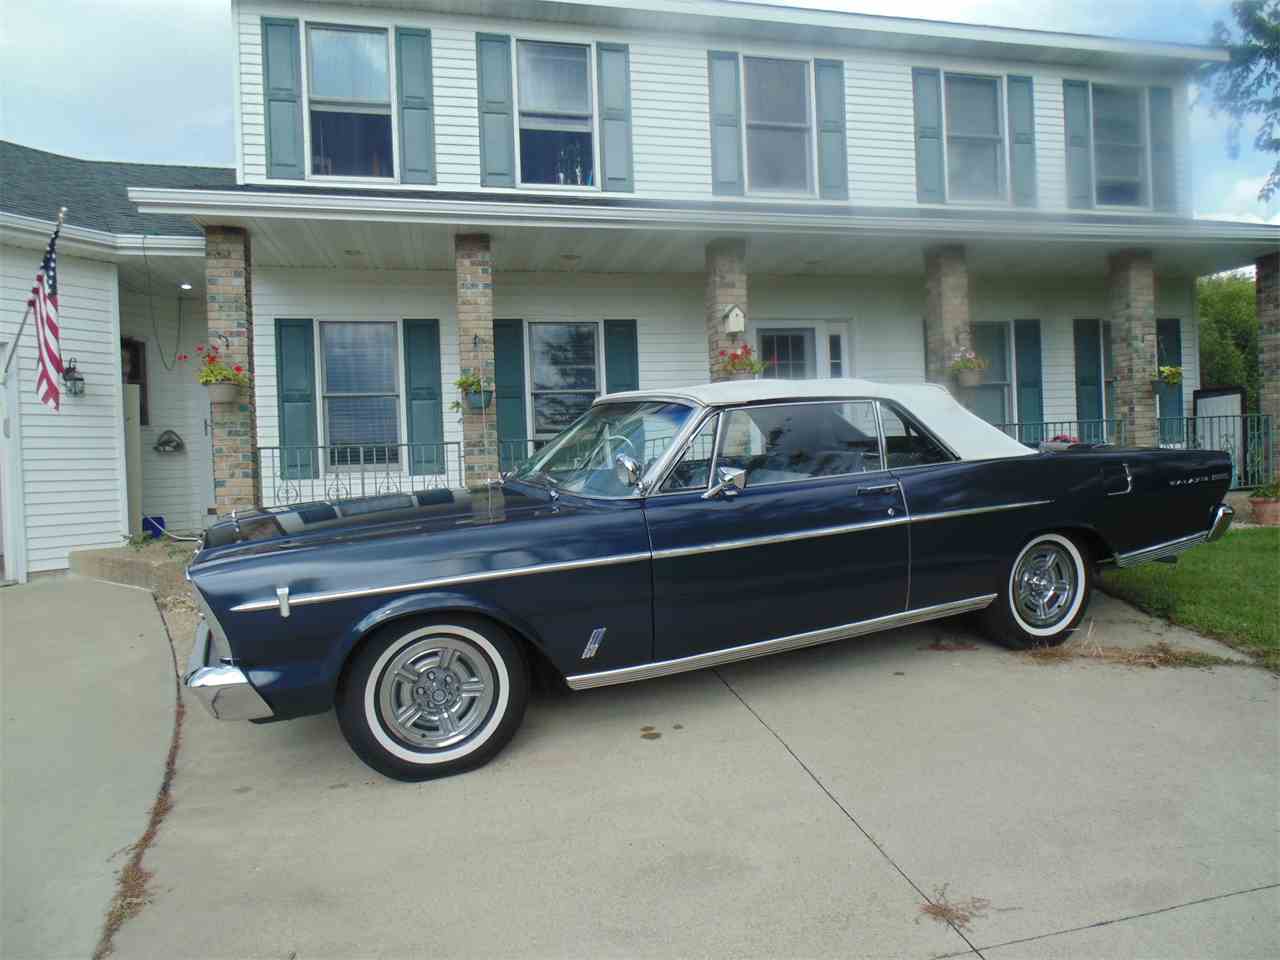 1966 Ford Galaxie 500 For Sale Classiccars Cc 1010615 throughout Classic Cars Rochester Mn